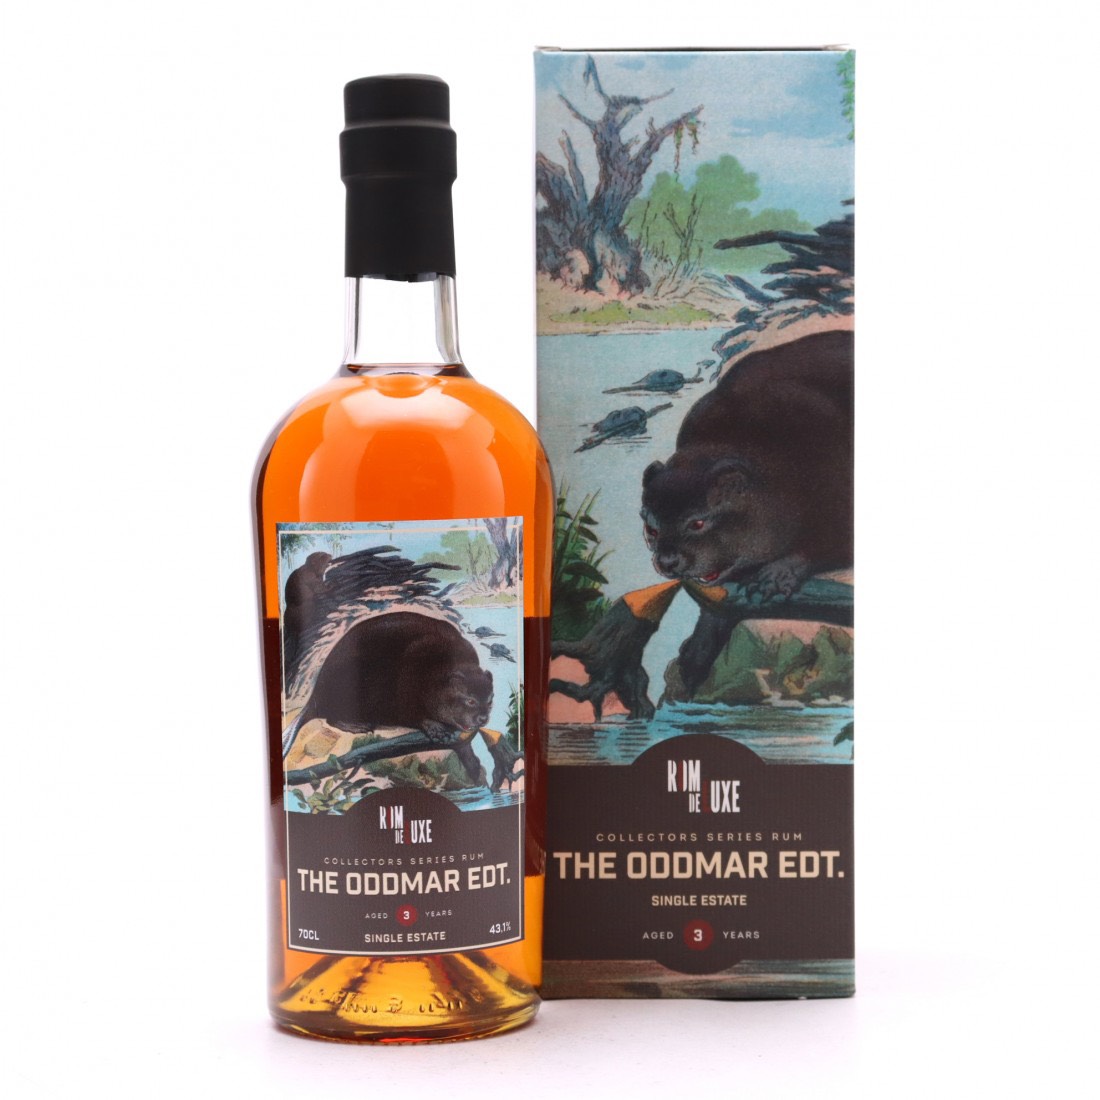 Bottle image of Collectors Series No. 4 The Oddmar Edition